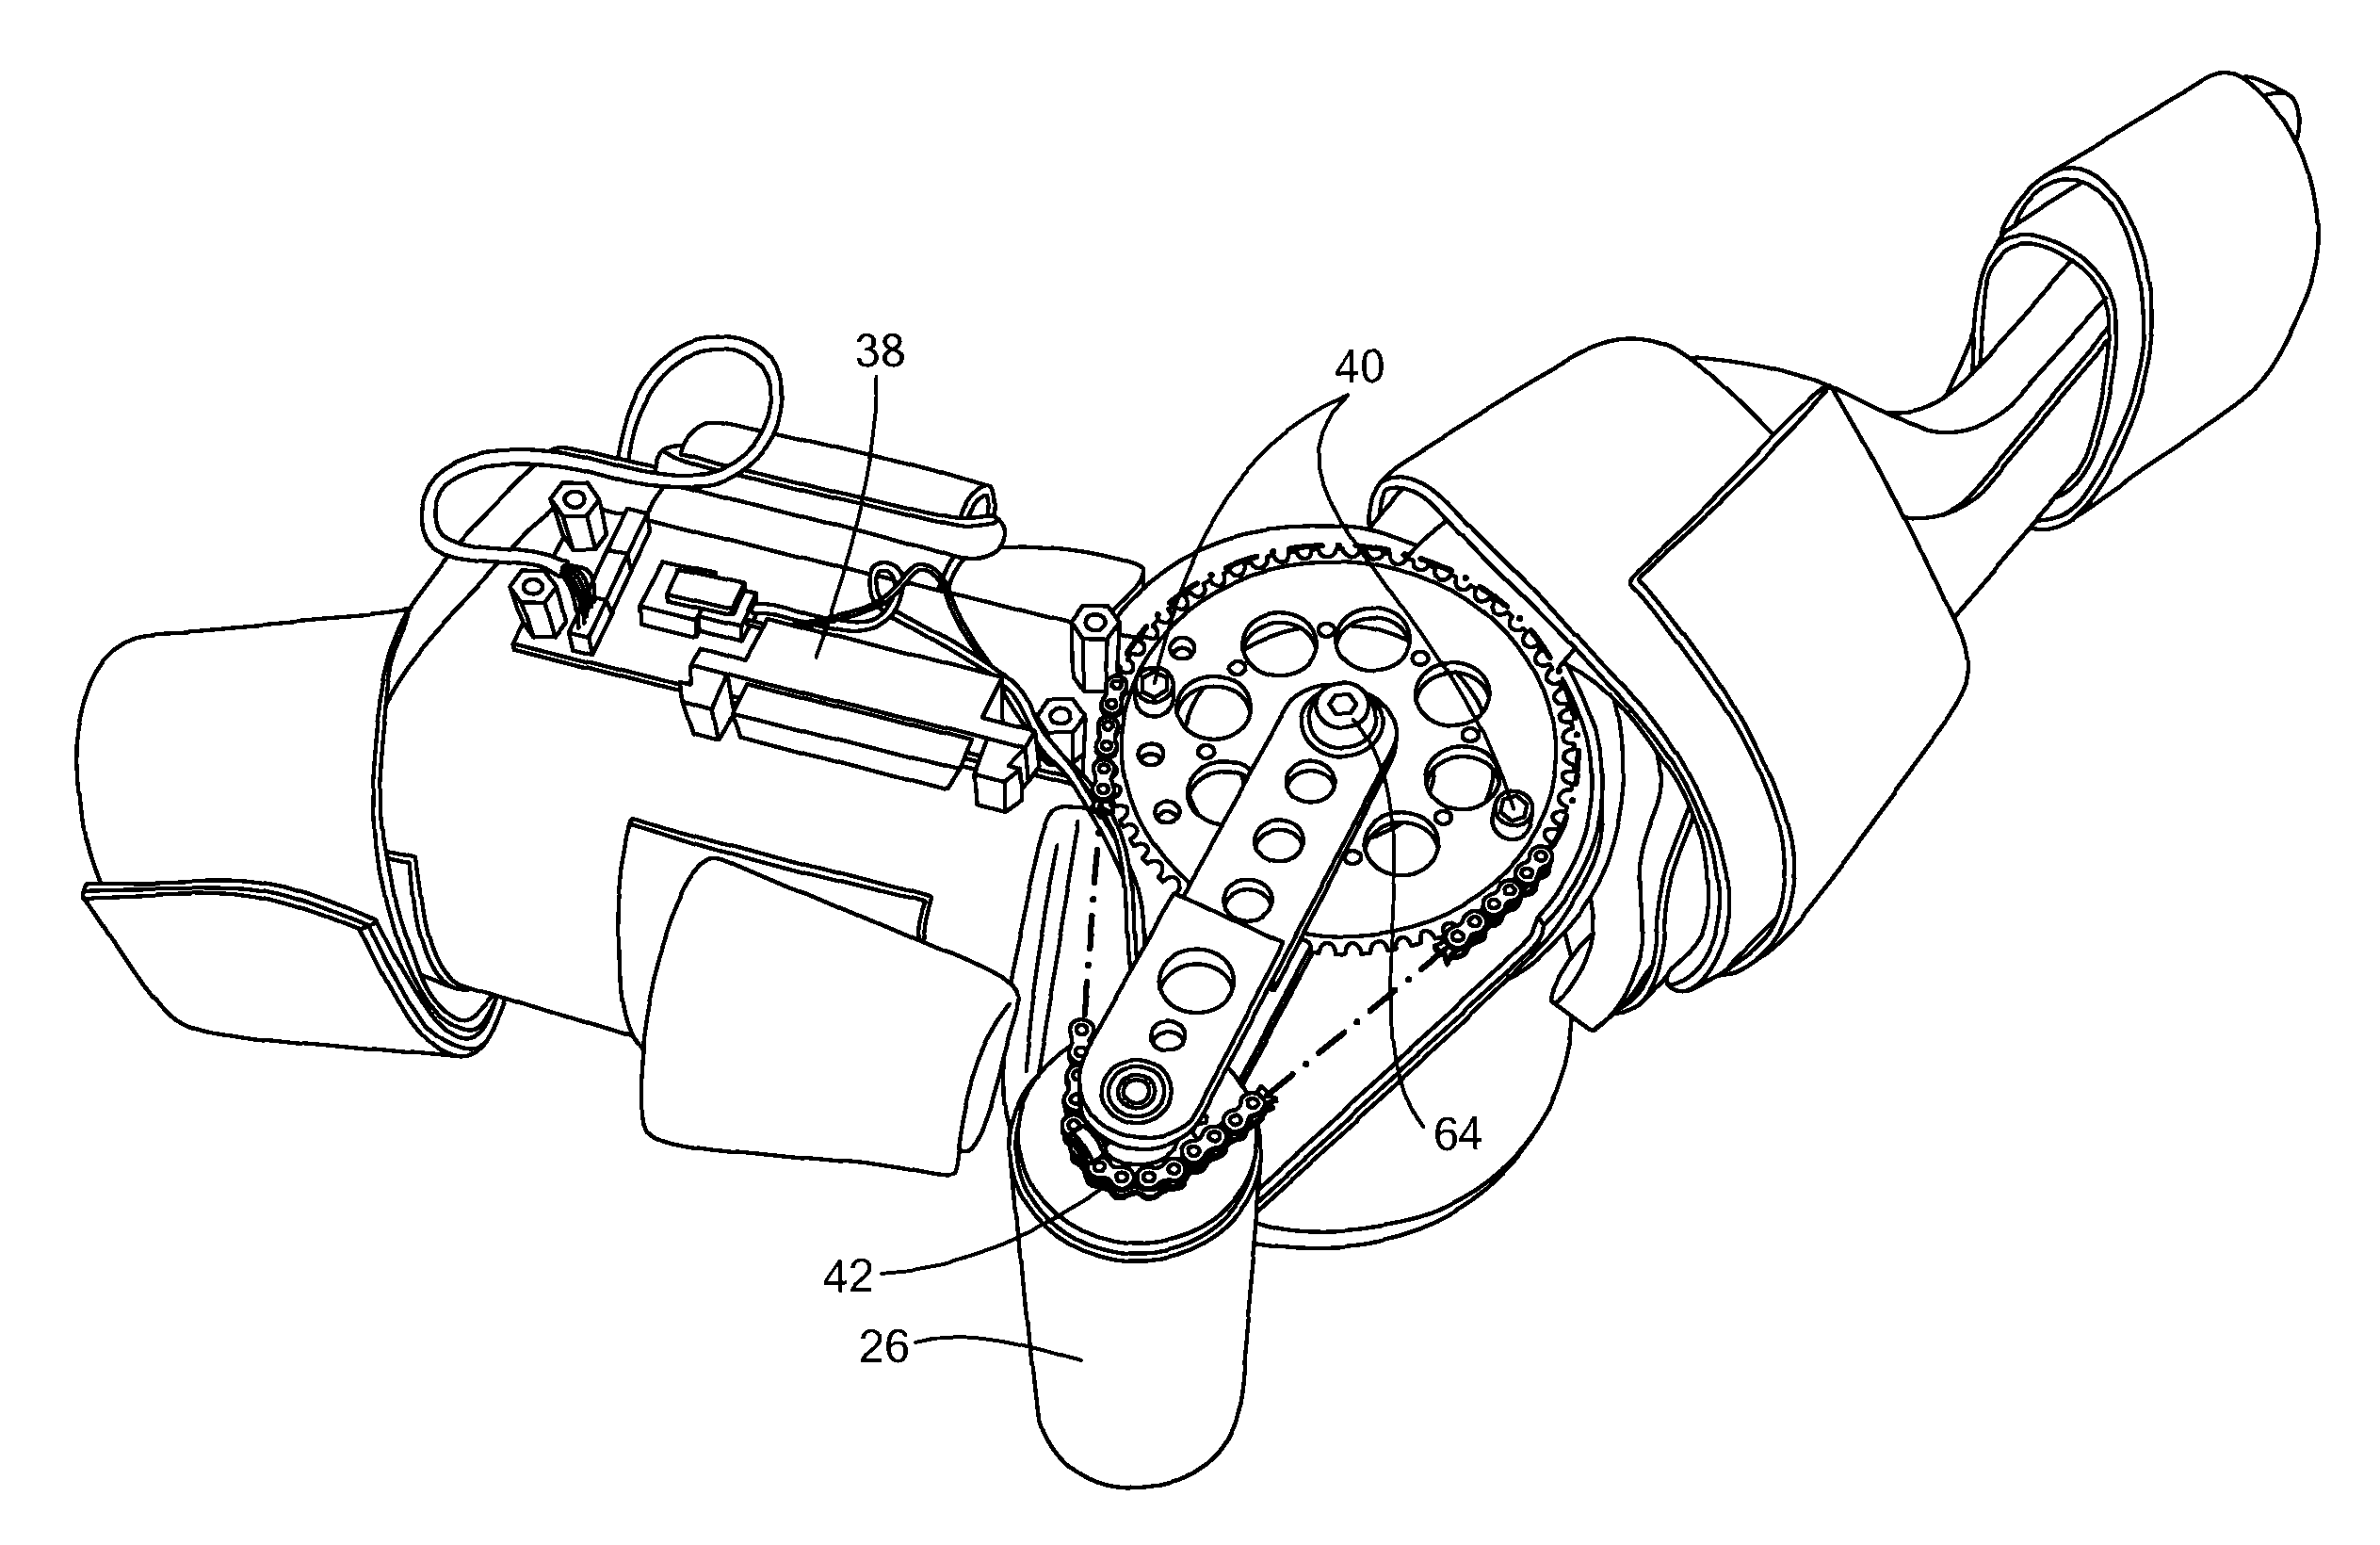 Powered orthotic device and method of using same